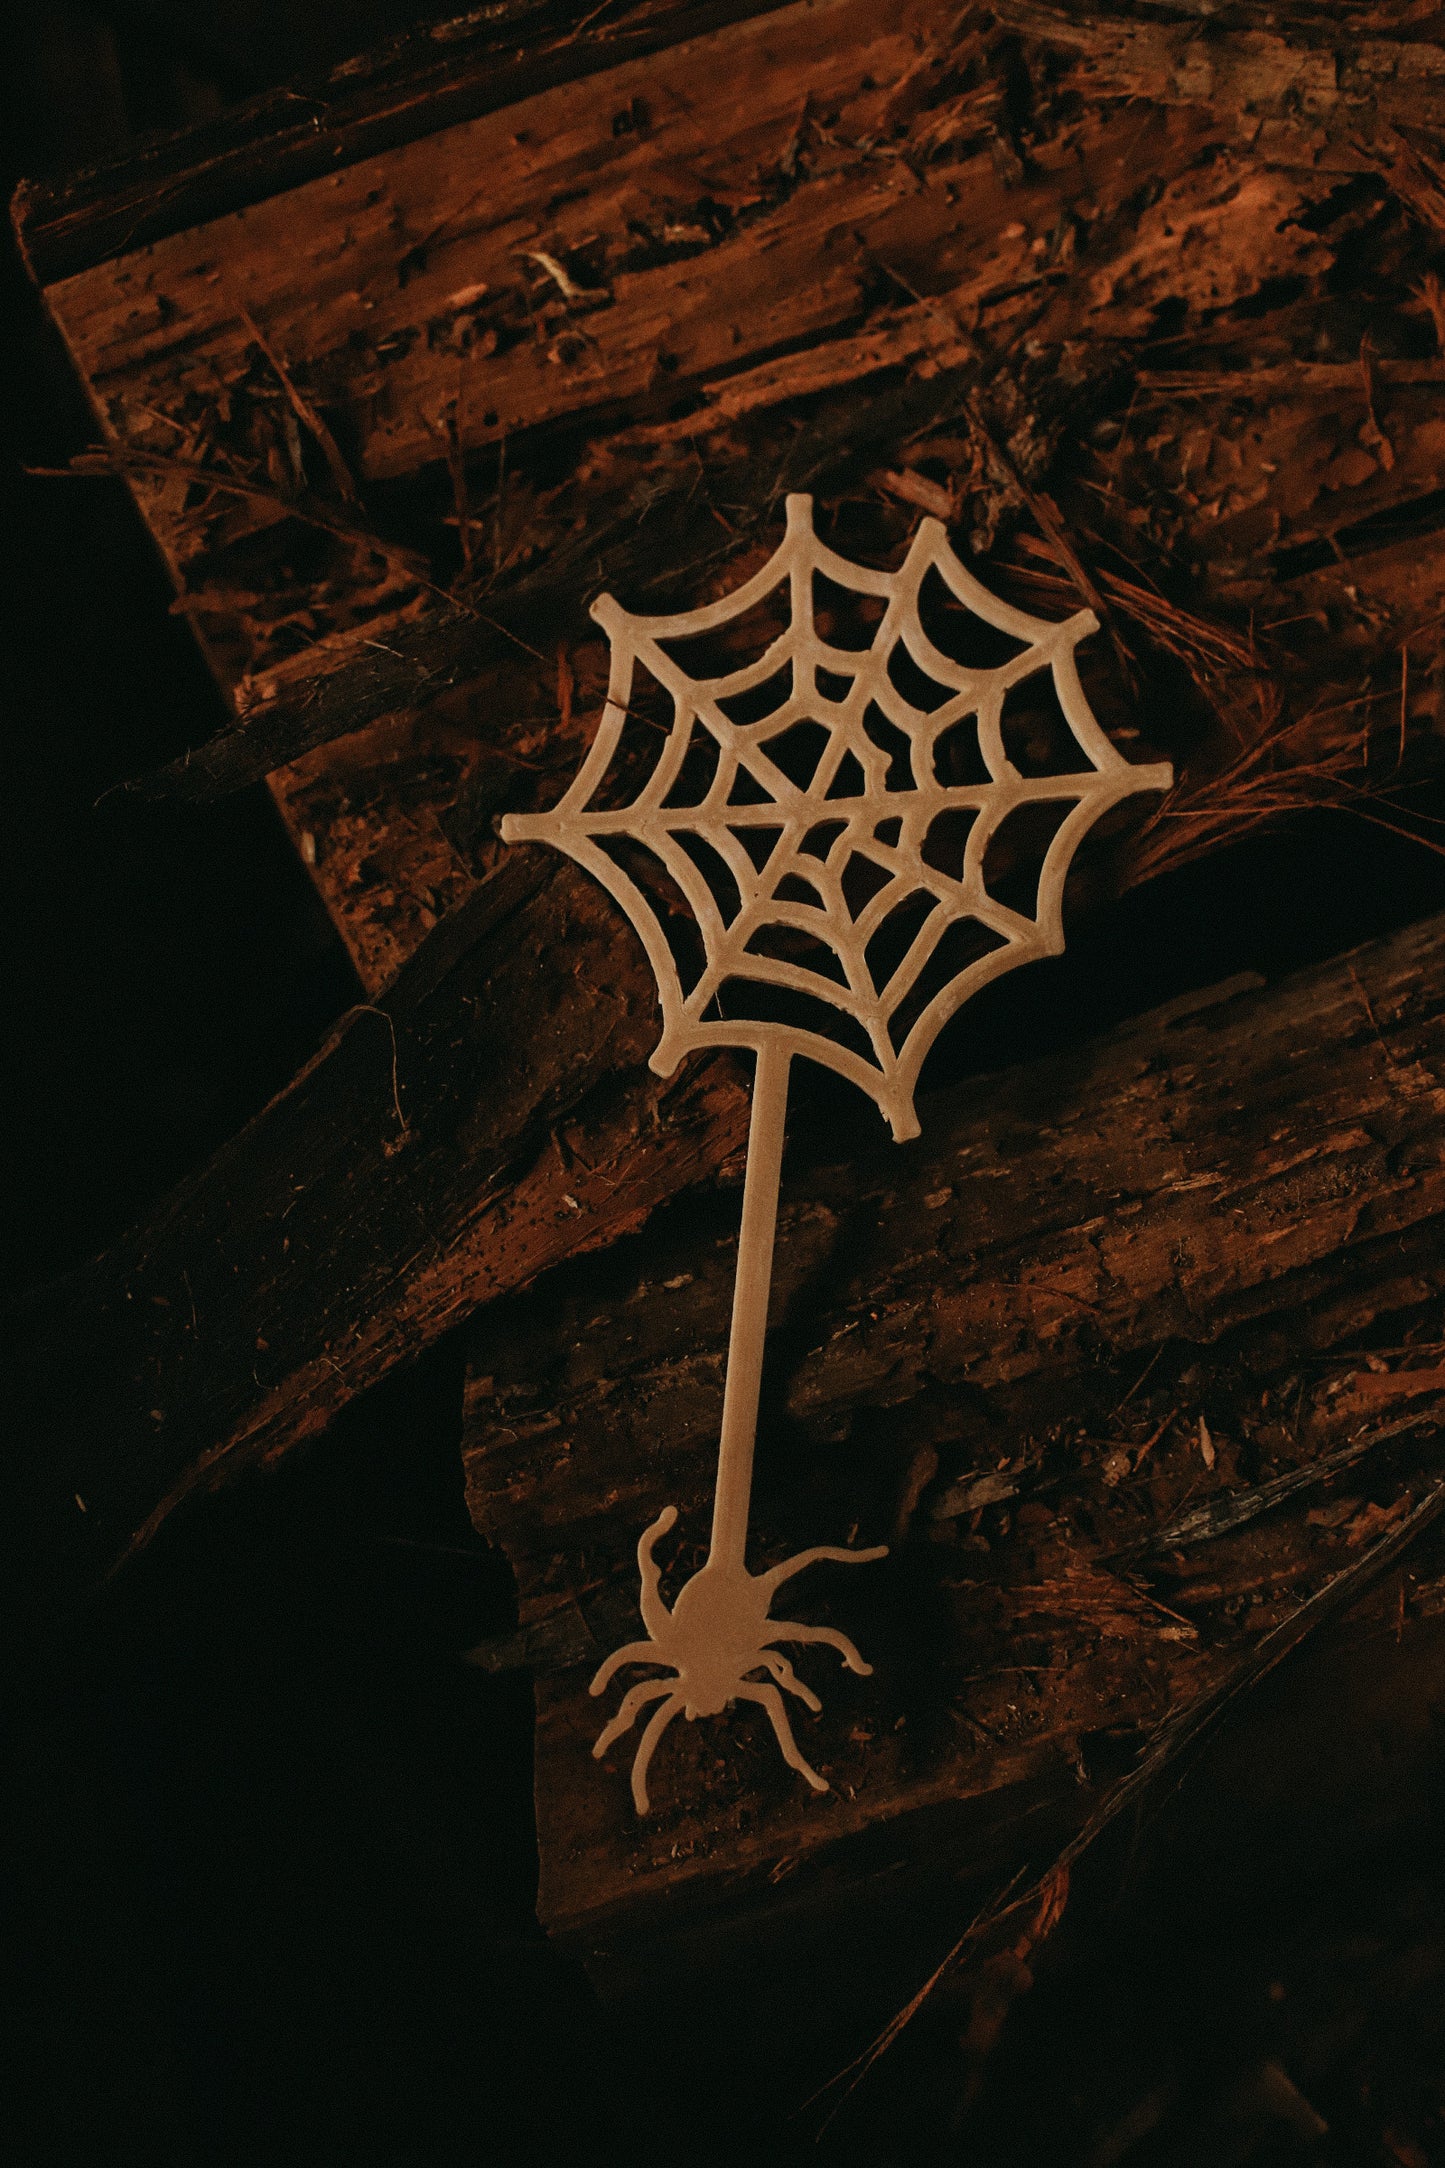 Eco Spider Bubble Wand